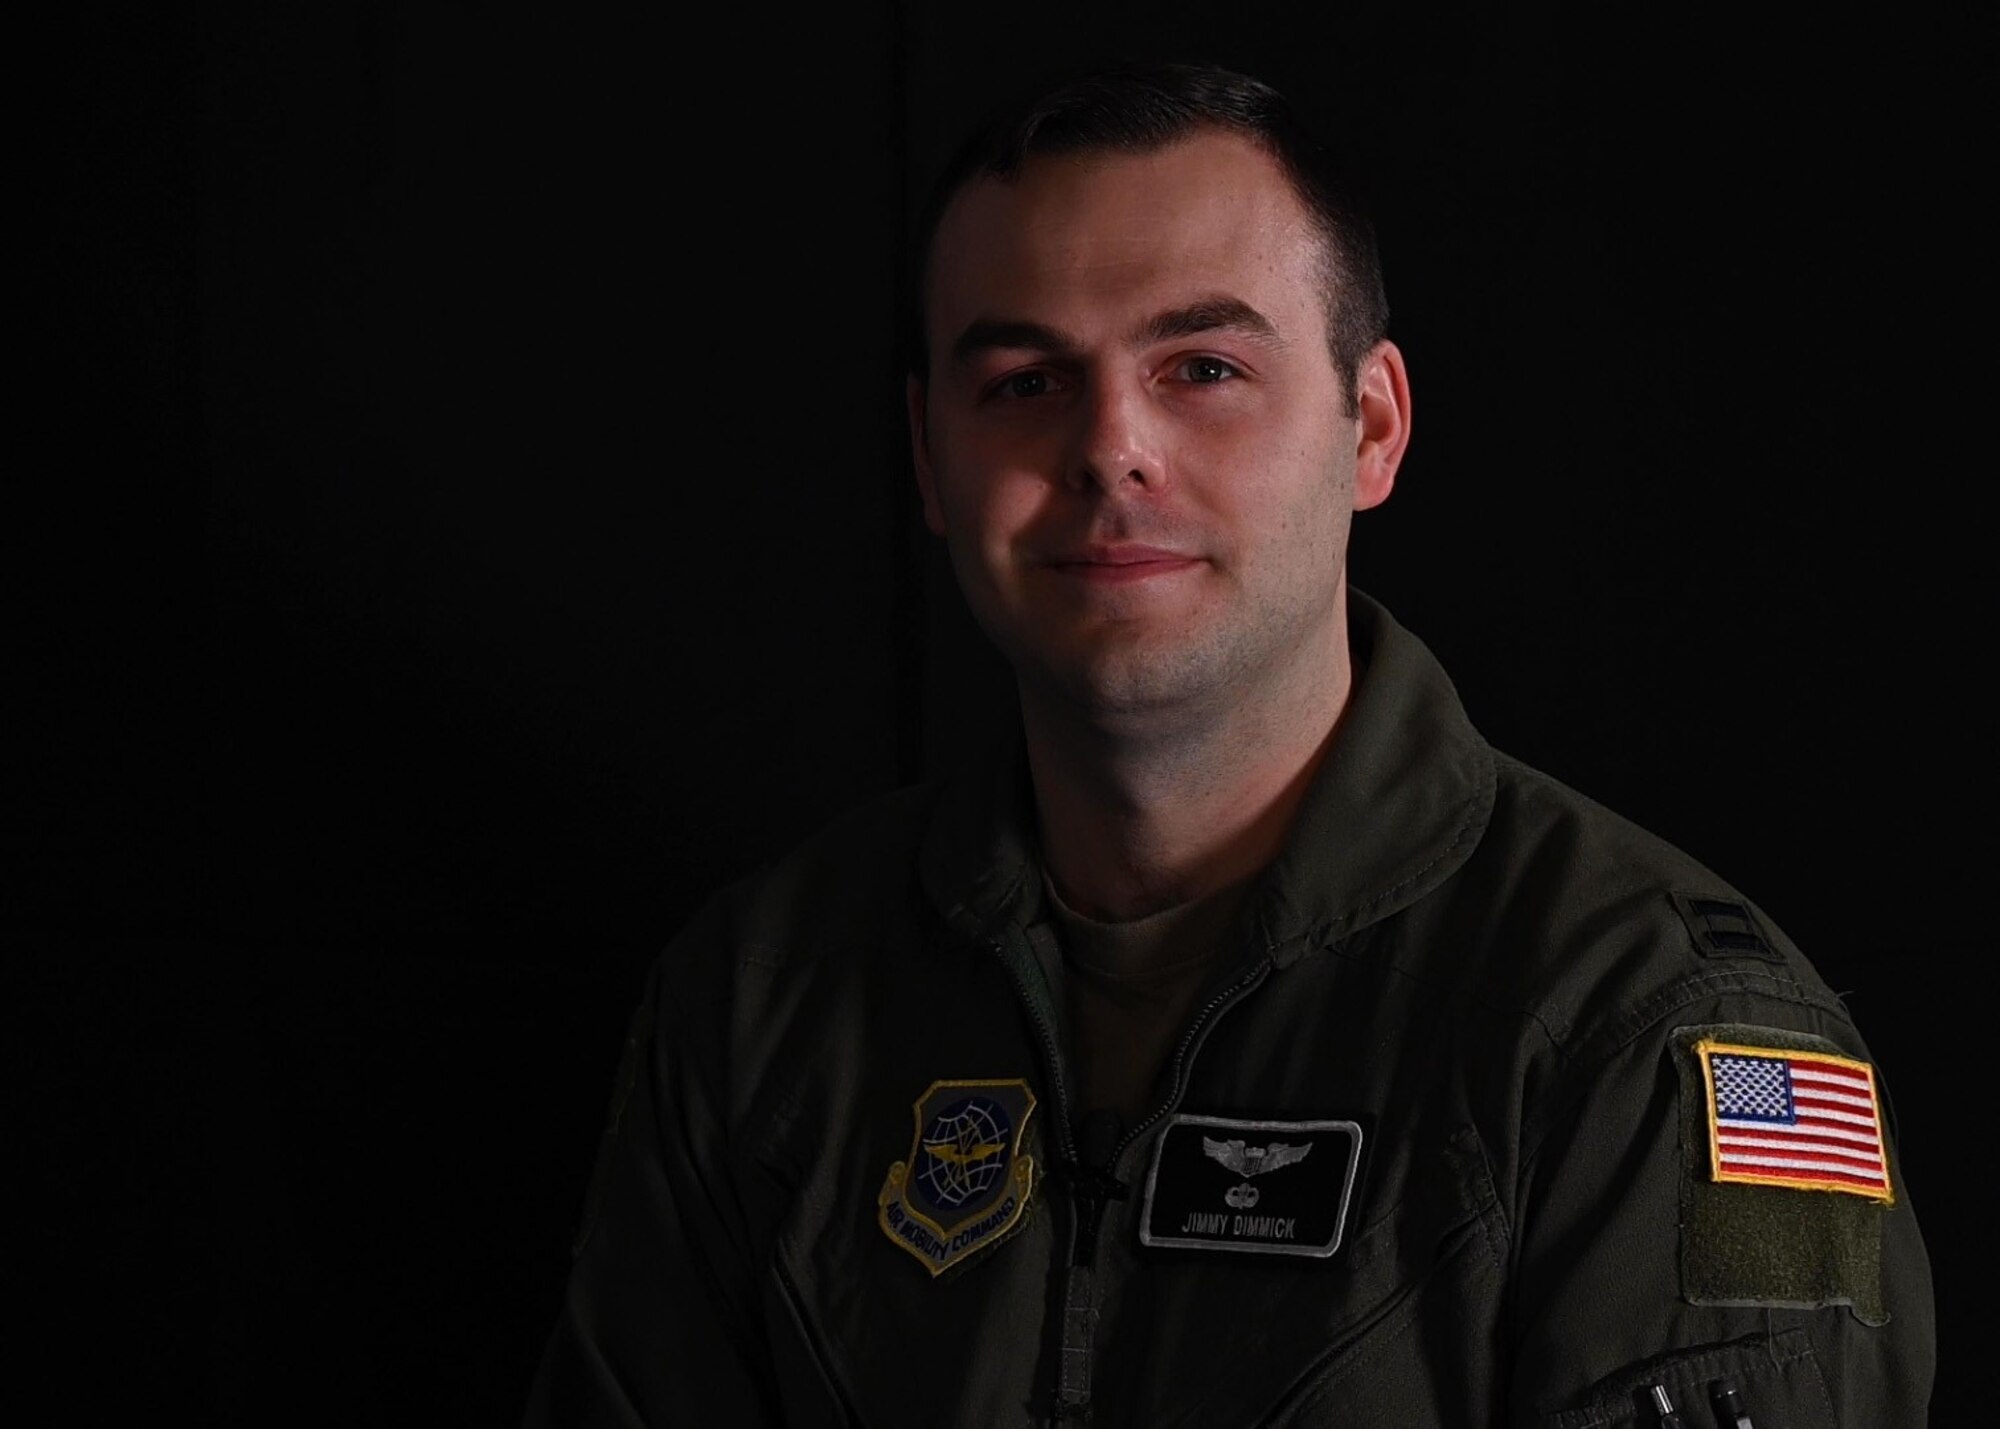 U.S. Air Force Capt. Jimmy Dimmick, 8th Airlift Squadron instructor pilot, was responsible for coordinating many of the aircrews, flights and evacuation missions that were operating in support of Operation Allies Refuge from mid to late August 2021. During Operation Allies Refuge, the United States evacuated more than 120,000 Afghan and U.S. citizens, military personnel and tons of cargo from Kabul, Afghanistan. (U.S. Air Force photo by Senior Airman Zoe Thacker)